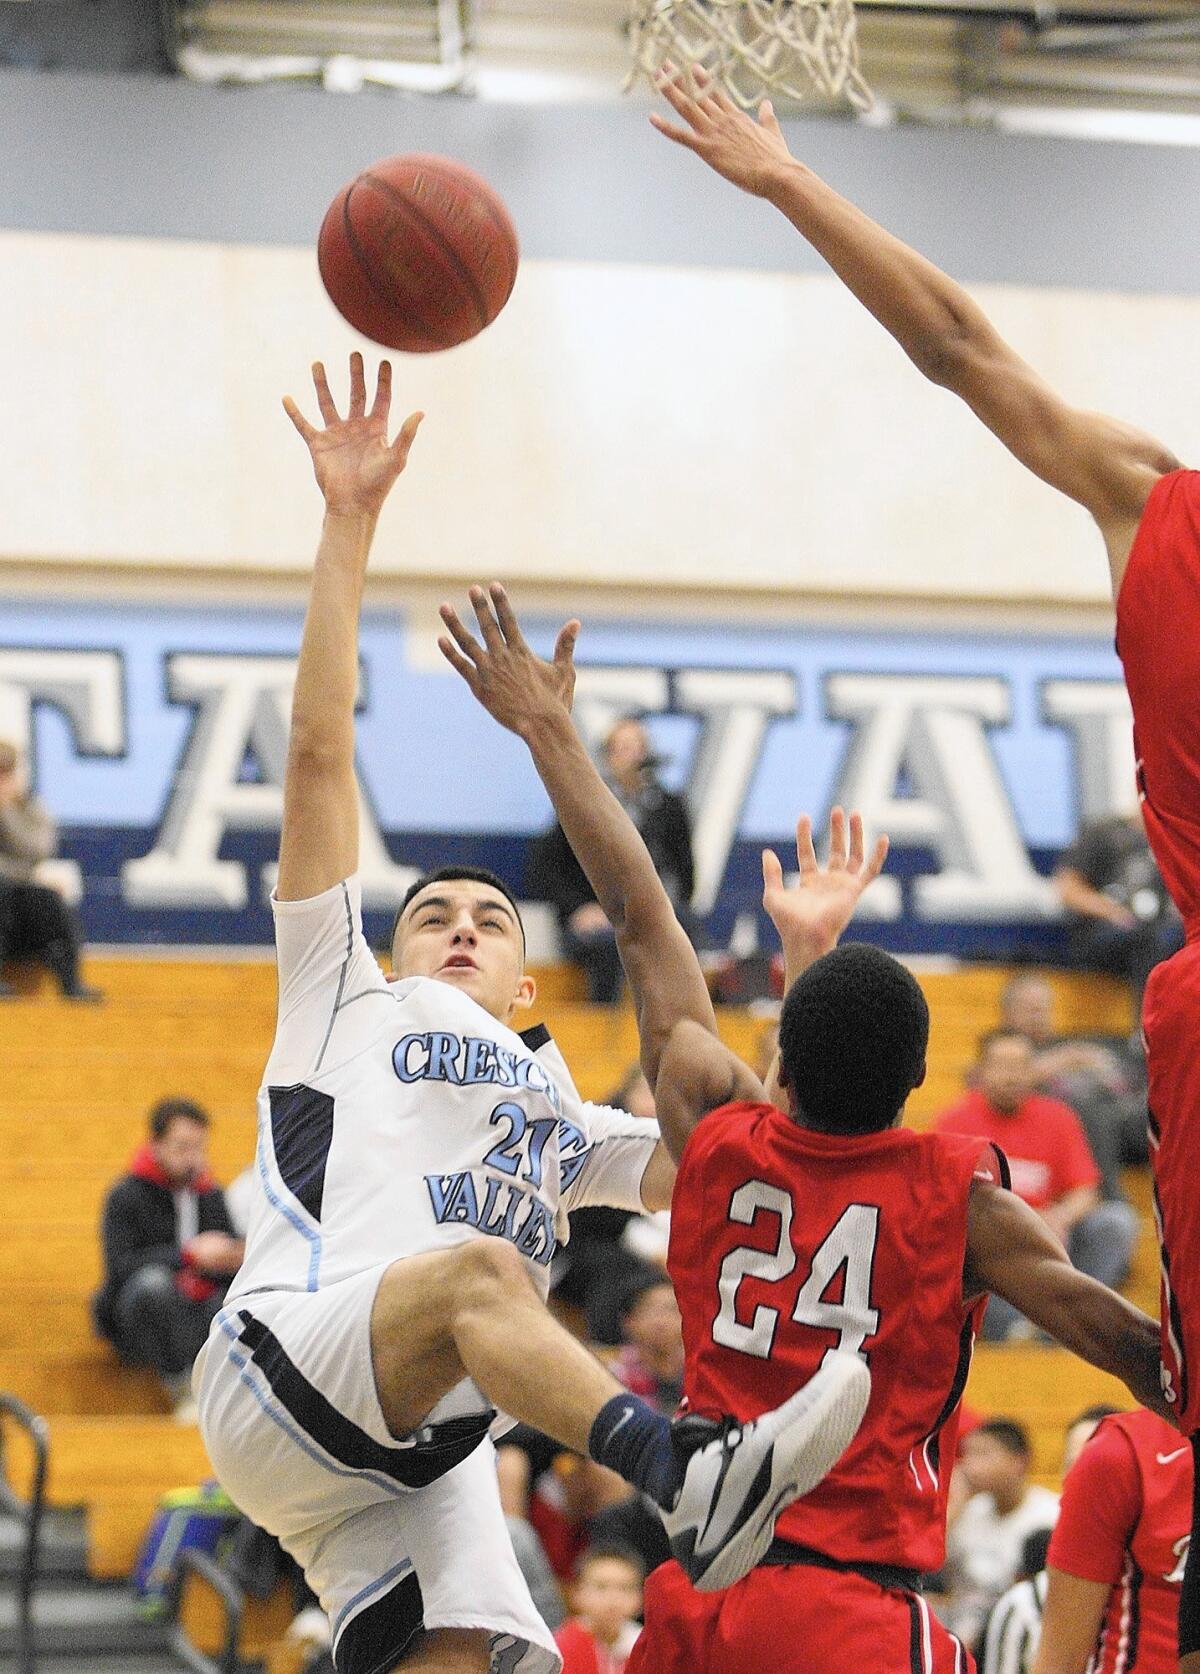 Crescenta Valley High's Arin Ovanessian goes up for a shot against the defense of Burroughs High's Nick Howard during a game on Tuesday, Jan. 5, 2016.